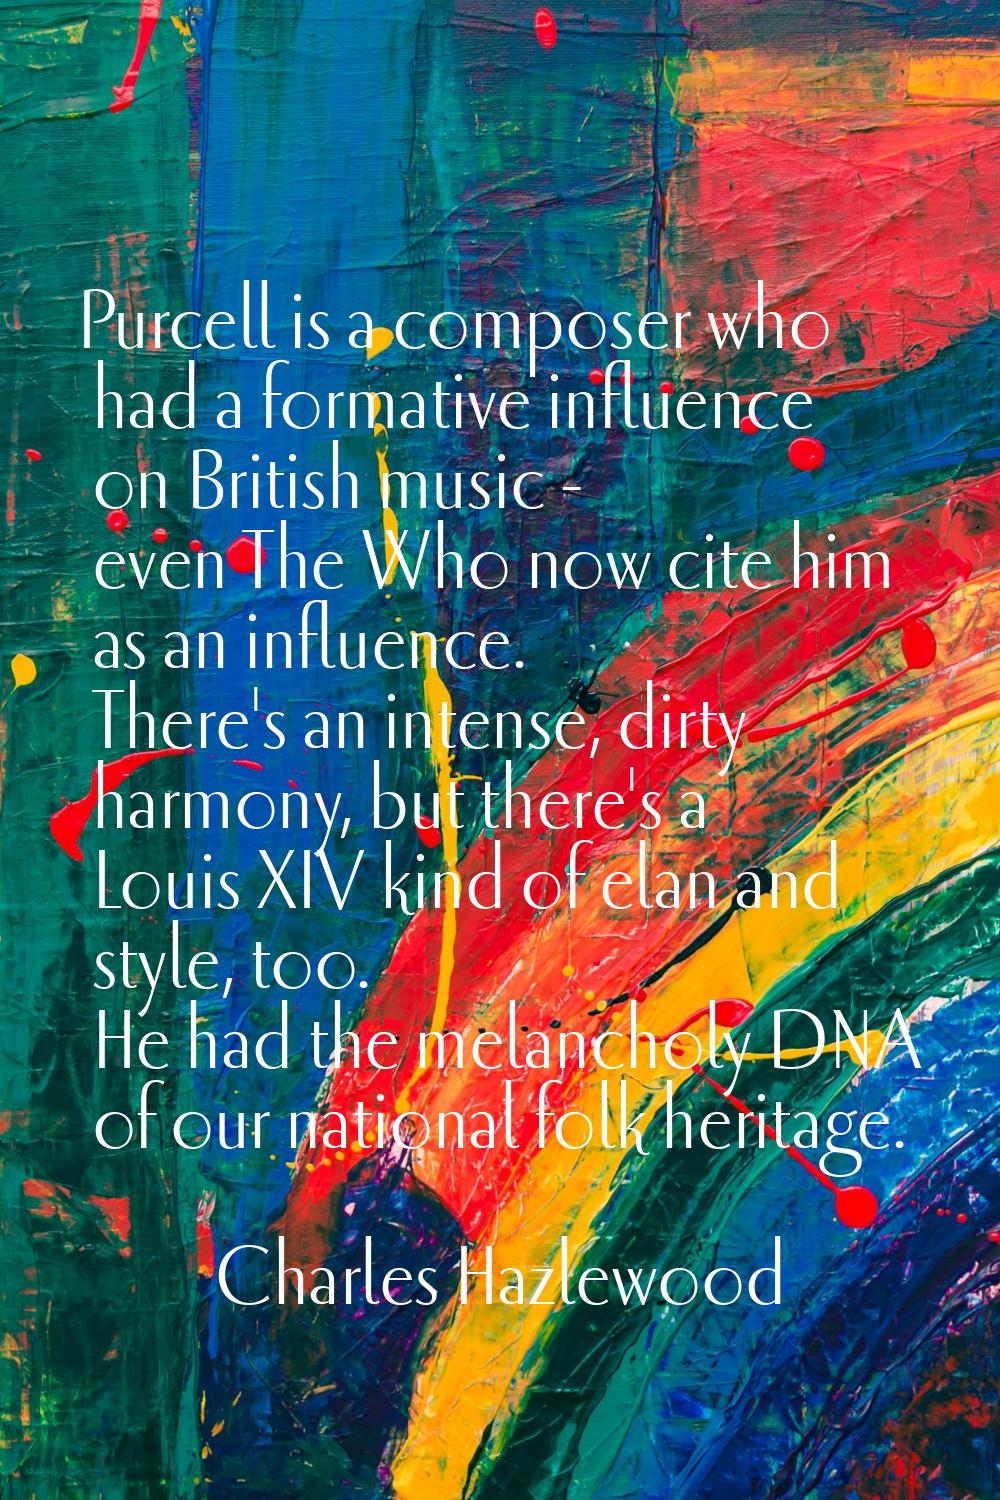 Purcell is a composer who had a formative influence on British music - even The Who now cite him as